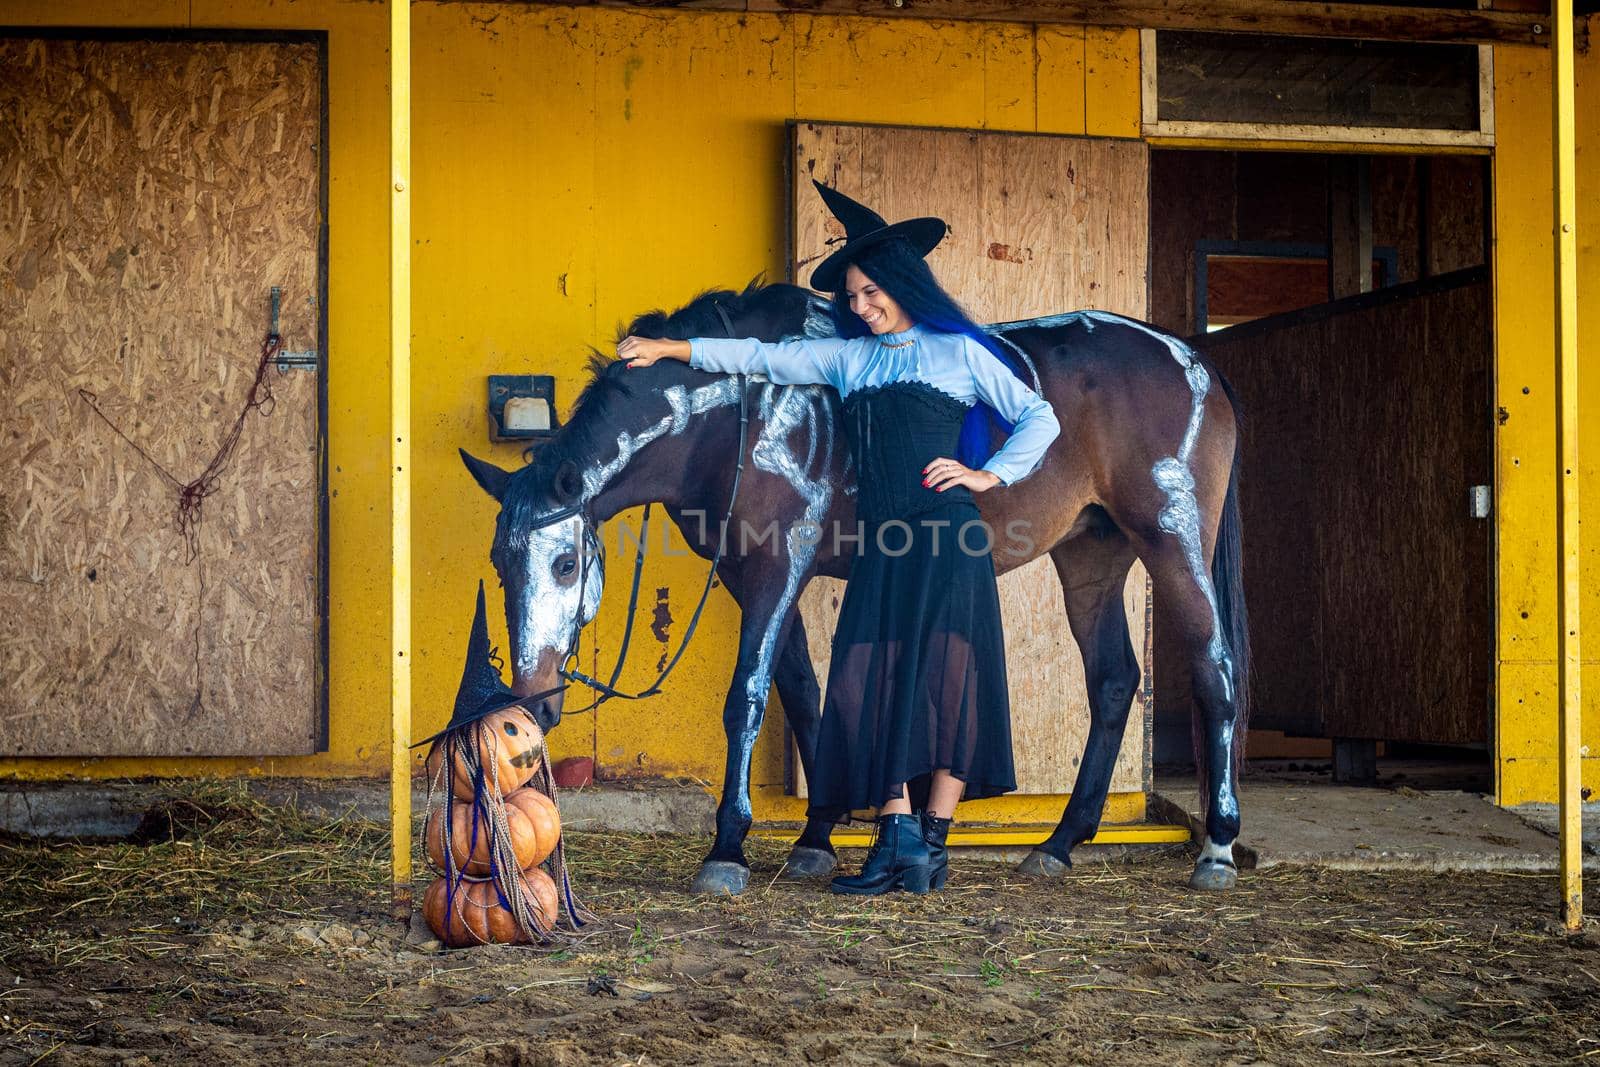 A horse is sniffing an impromptu figurine of pumpkins, a girl dressed as a witch is standing nearby and smiling